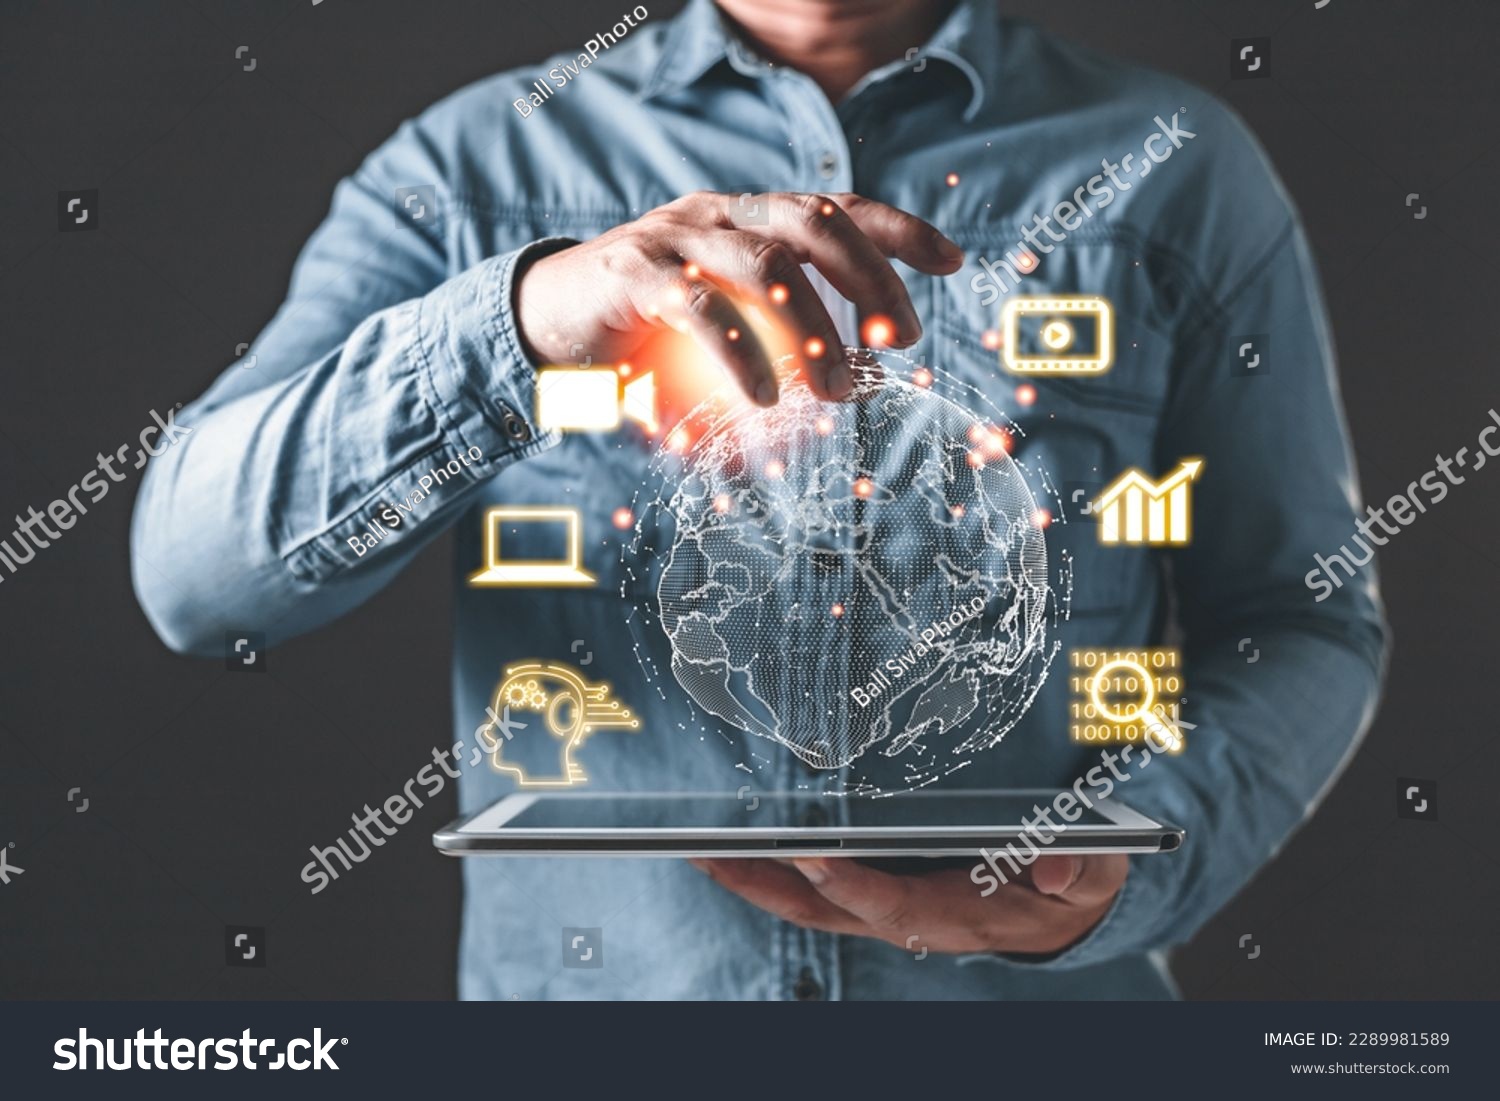 Man holding tablet and world diagram with icons, Marketers education, research, analyze media video streaming content creation and online marketing strategies to grow their digital business. #2289981589